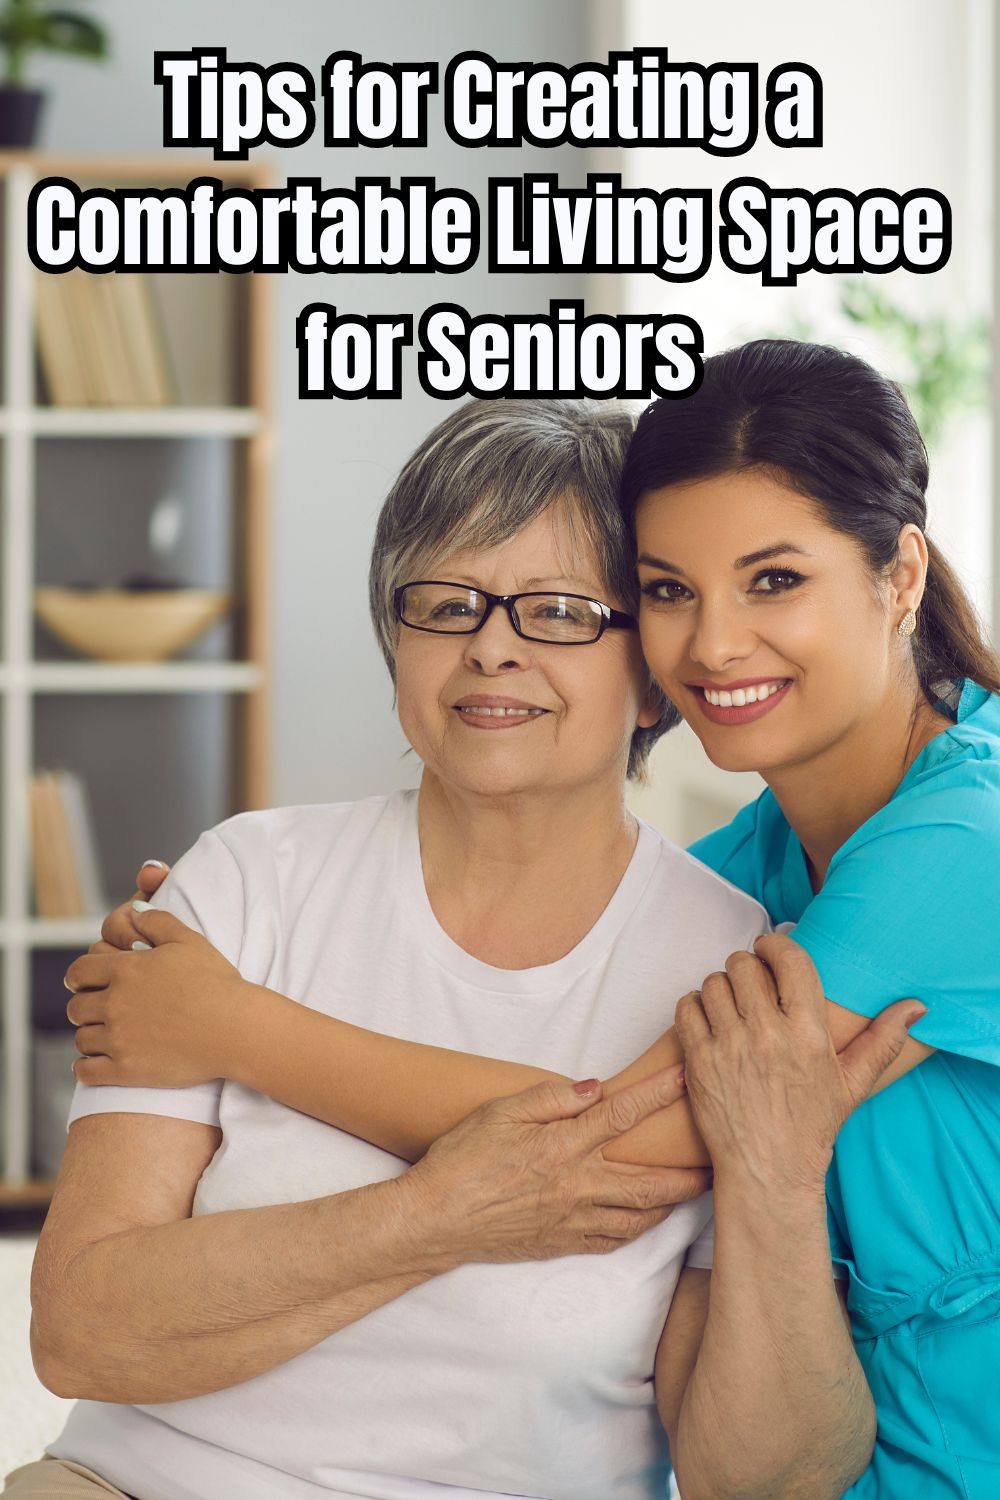 Tips for Creating a Comfortable Living Space for Seniors